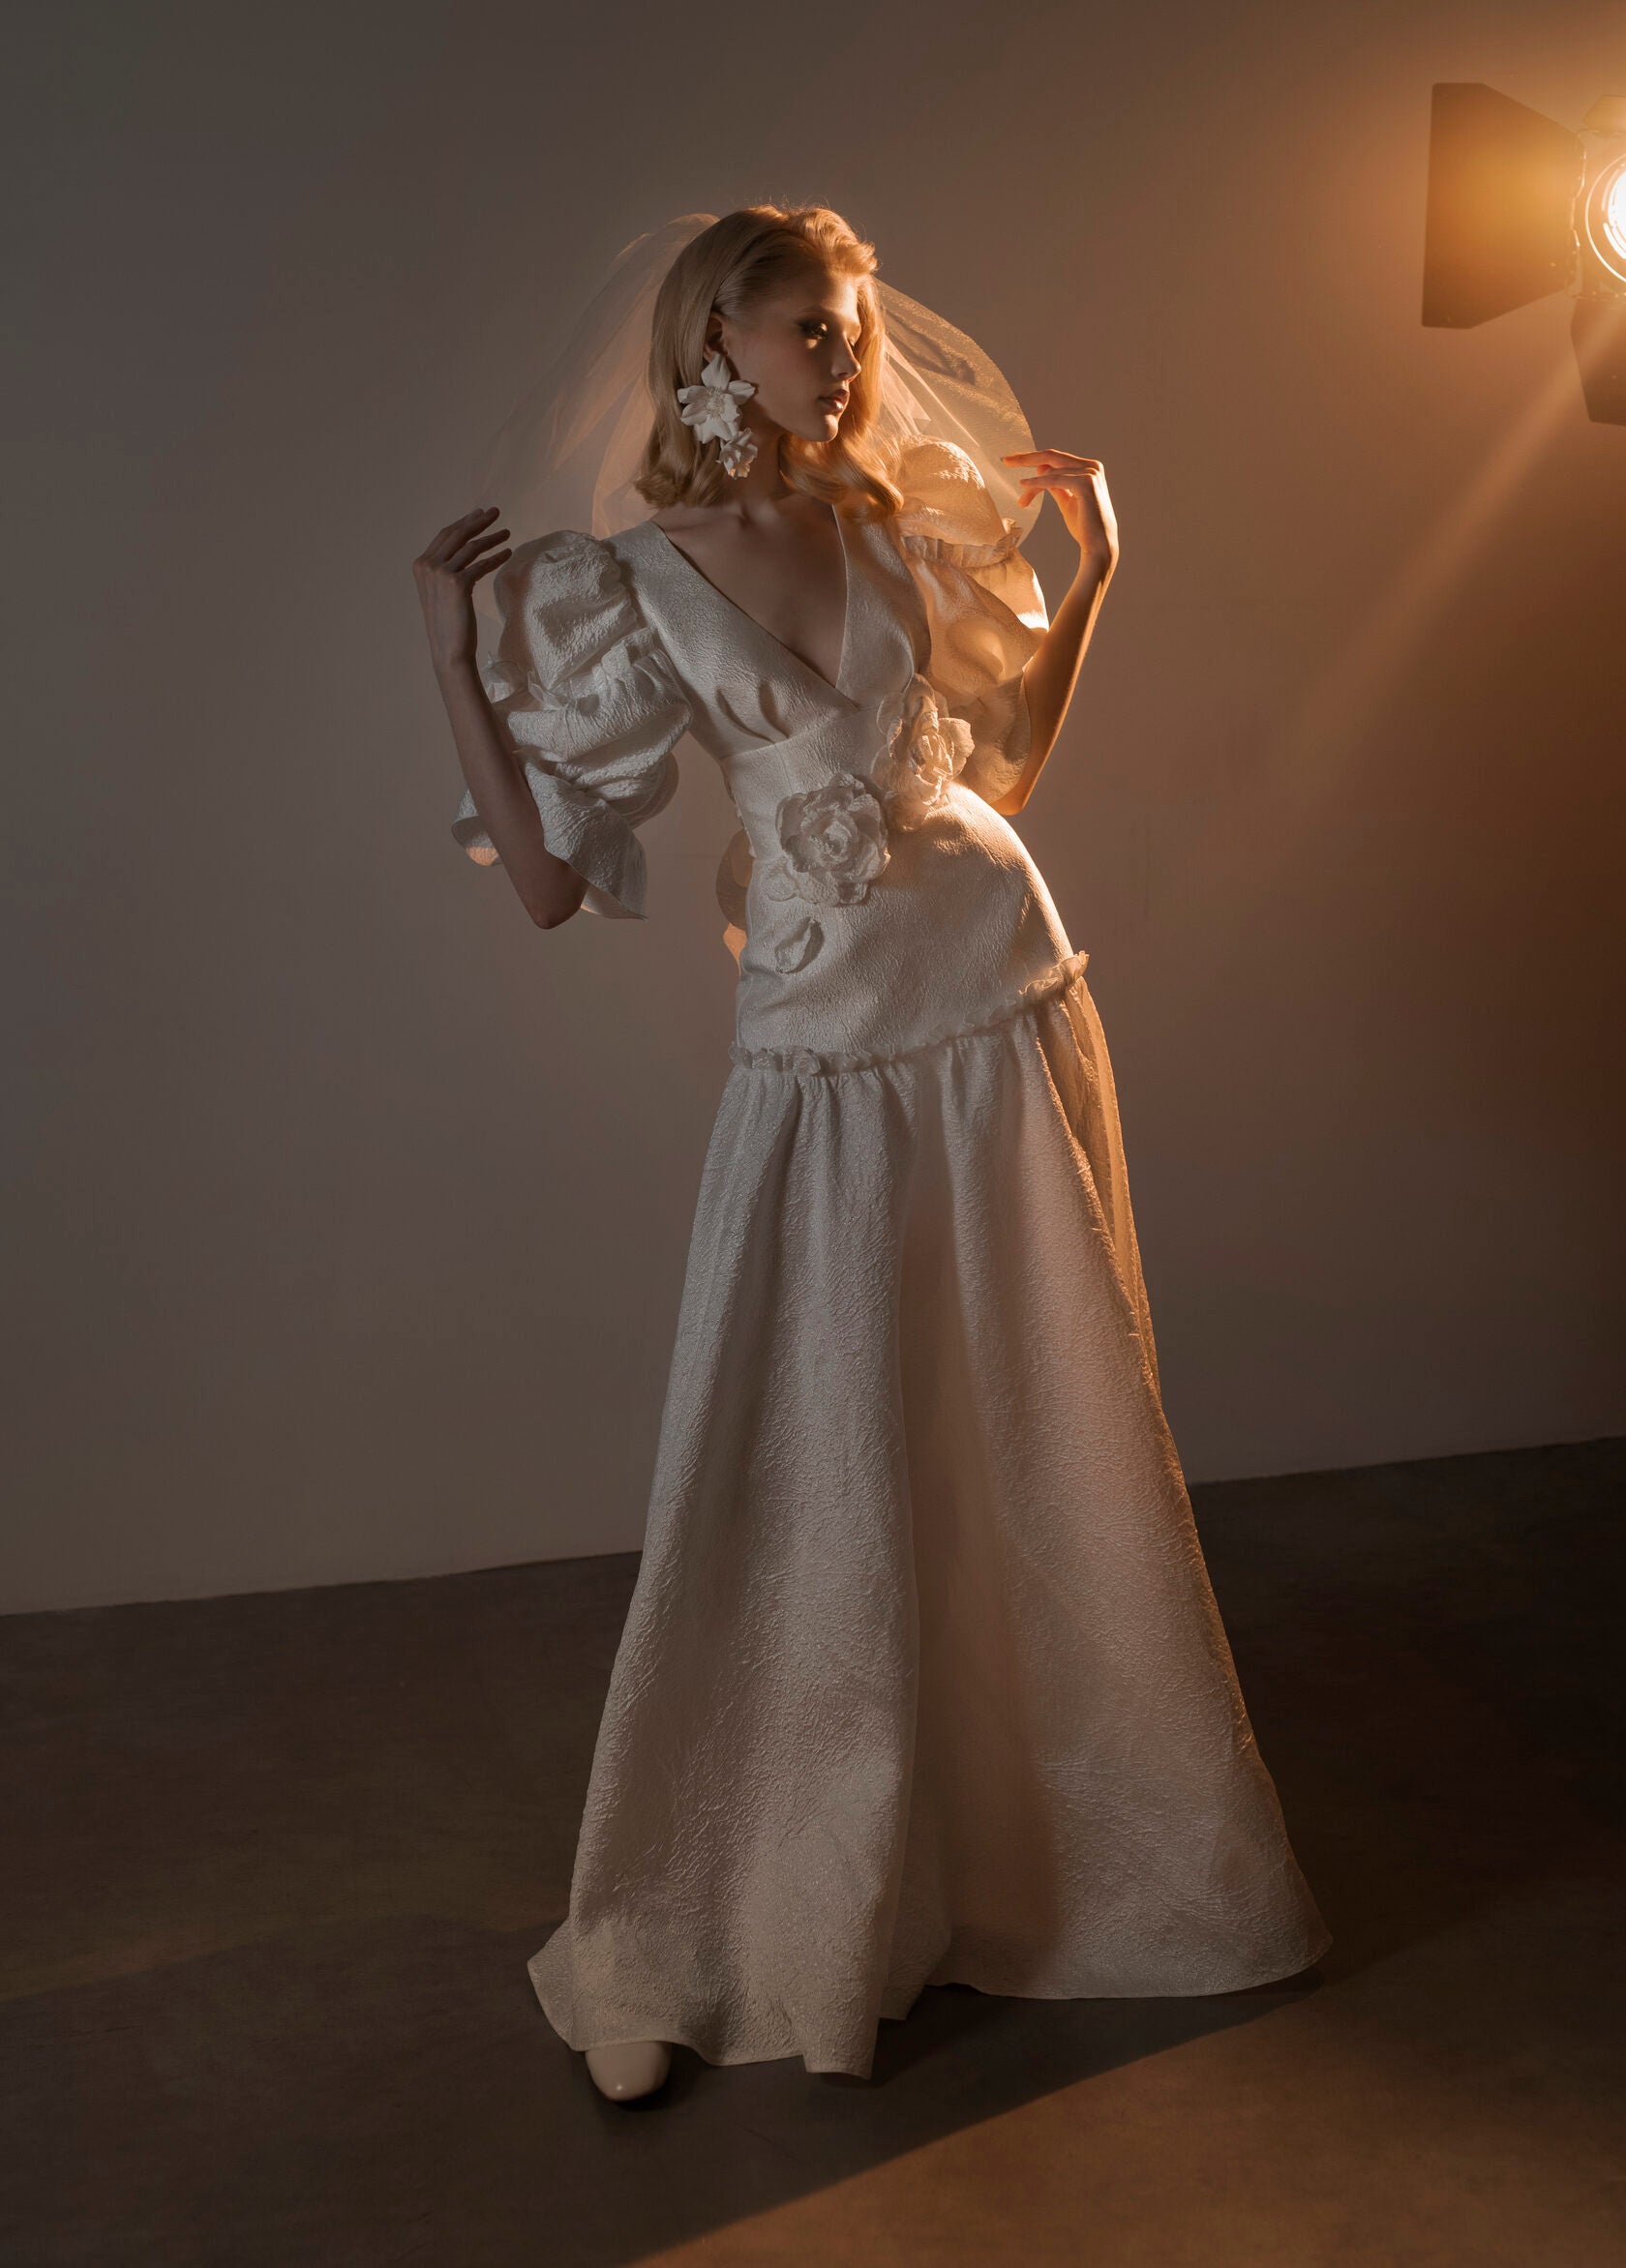 Unigue 90's inspired wedding dress with puffy sleeves.